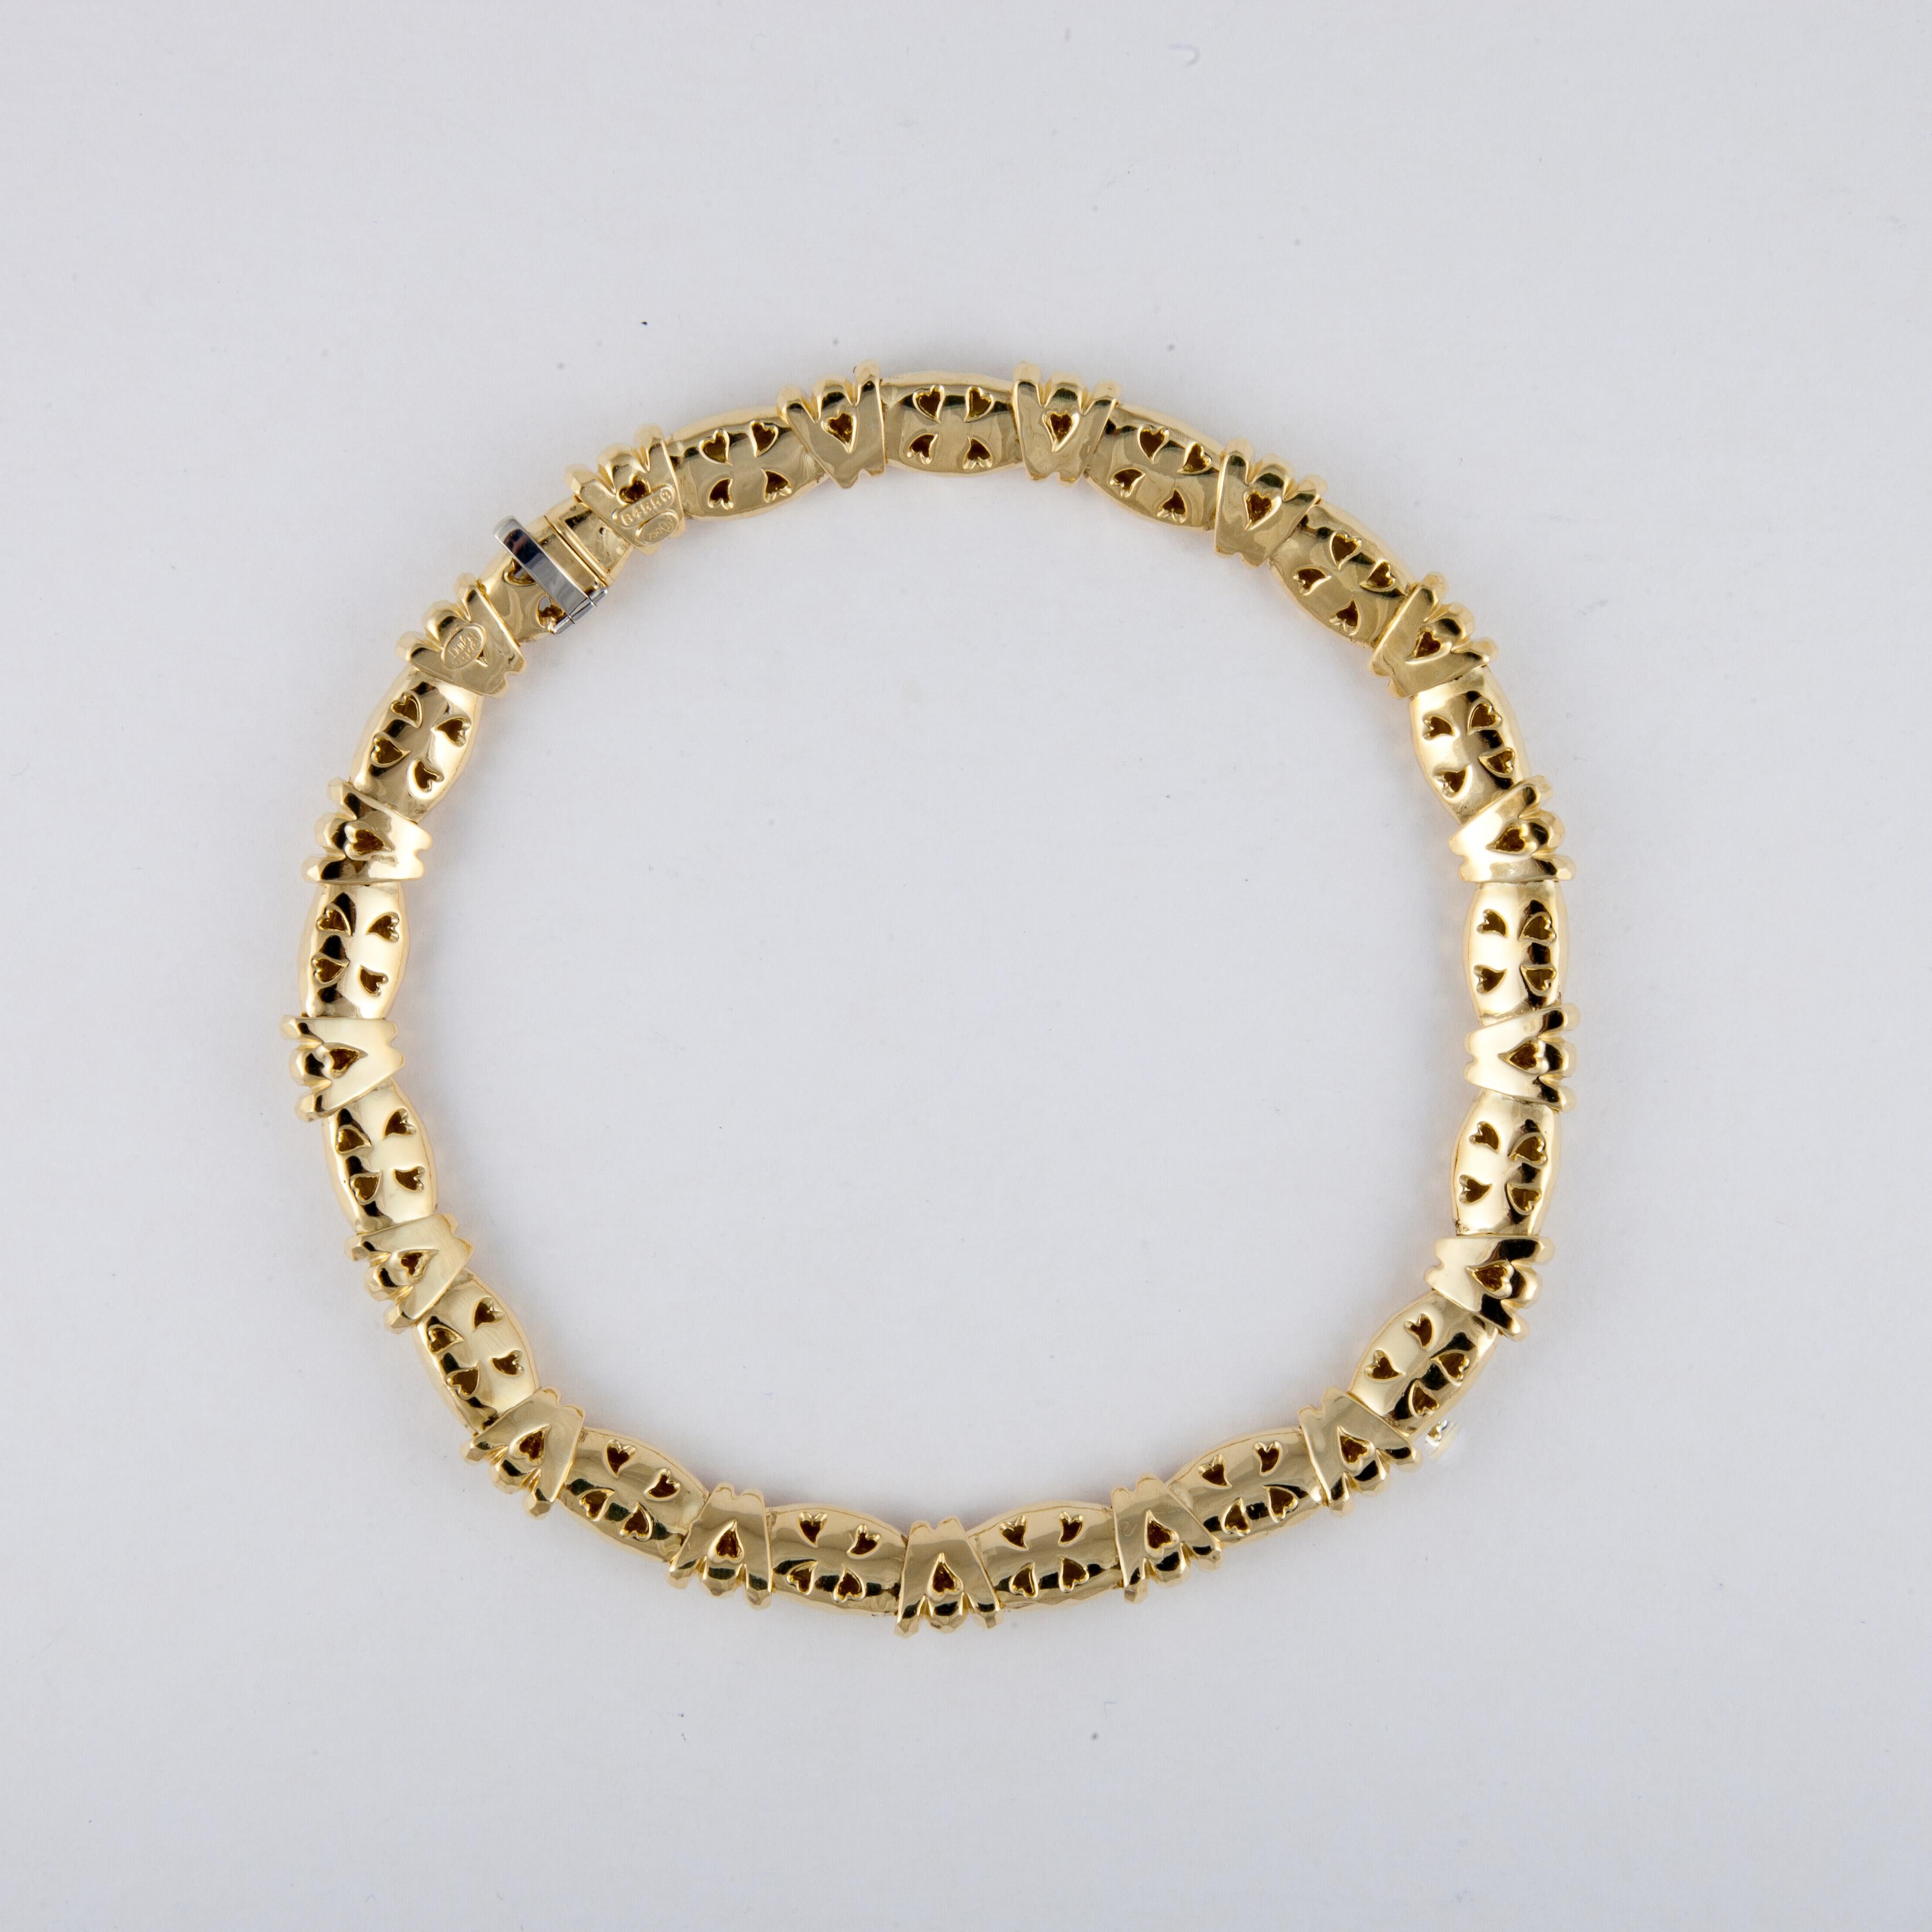 Henry Dunay collar necklace in 18K hammered yellow gold, marked 